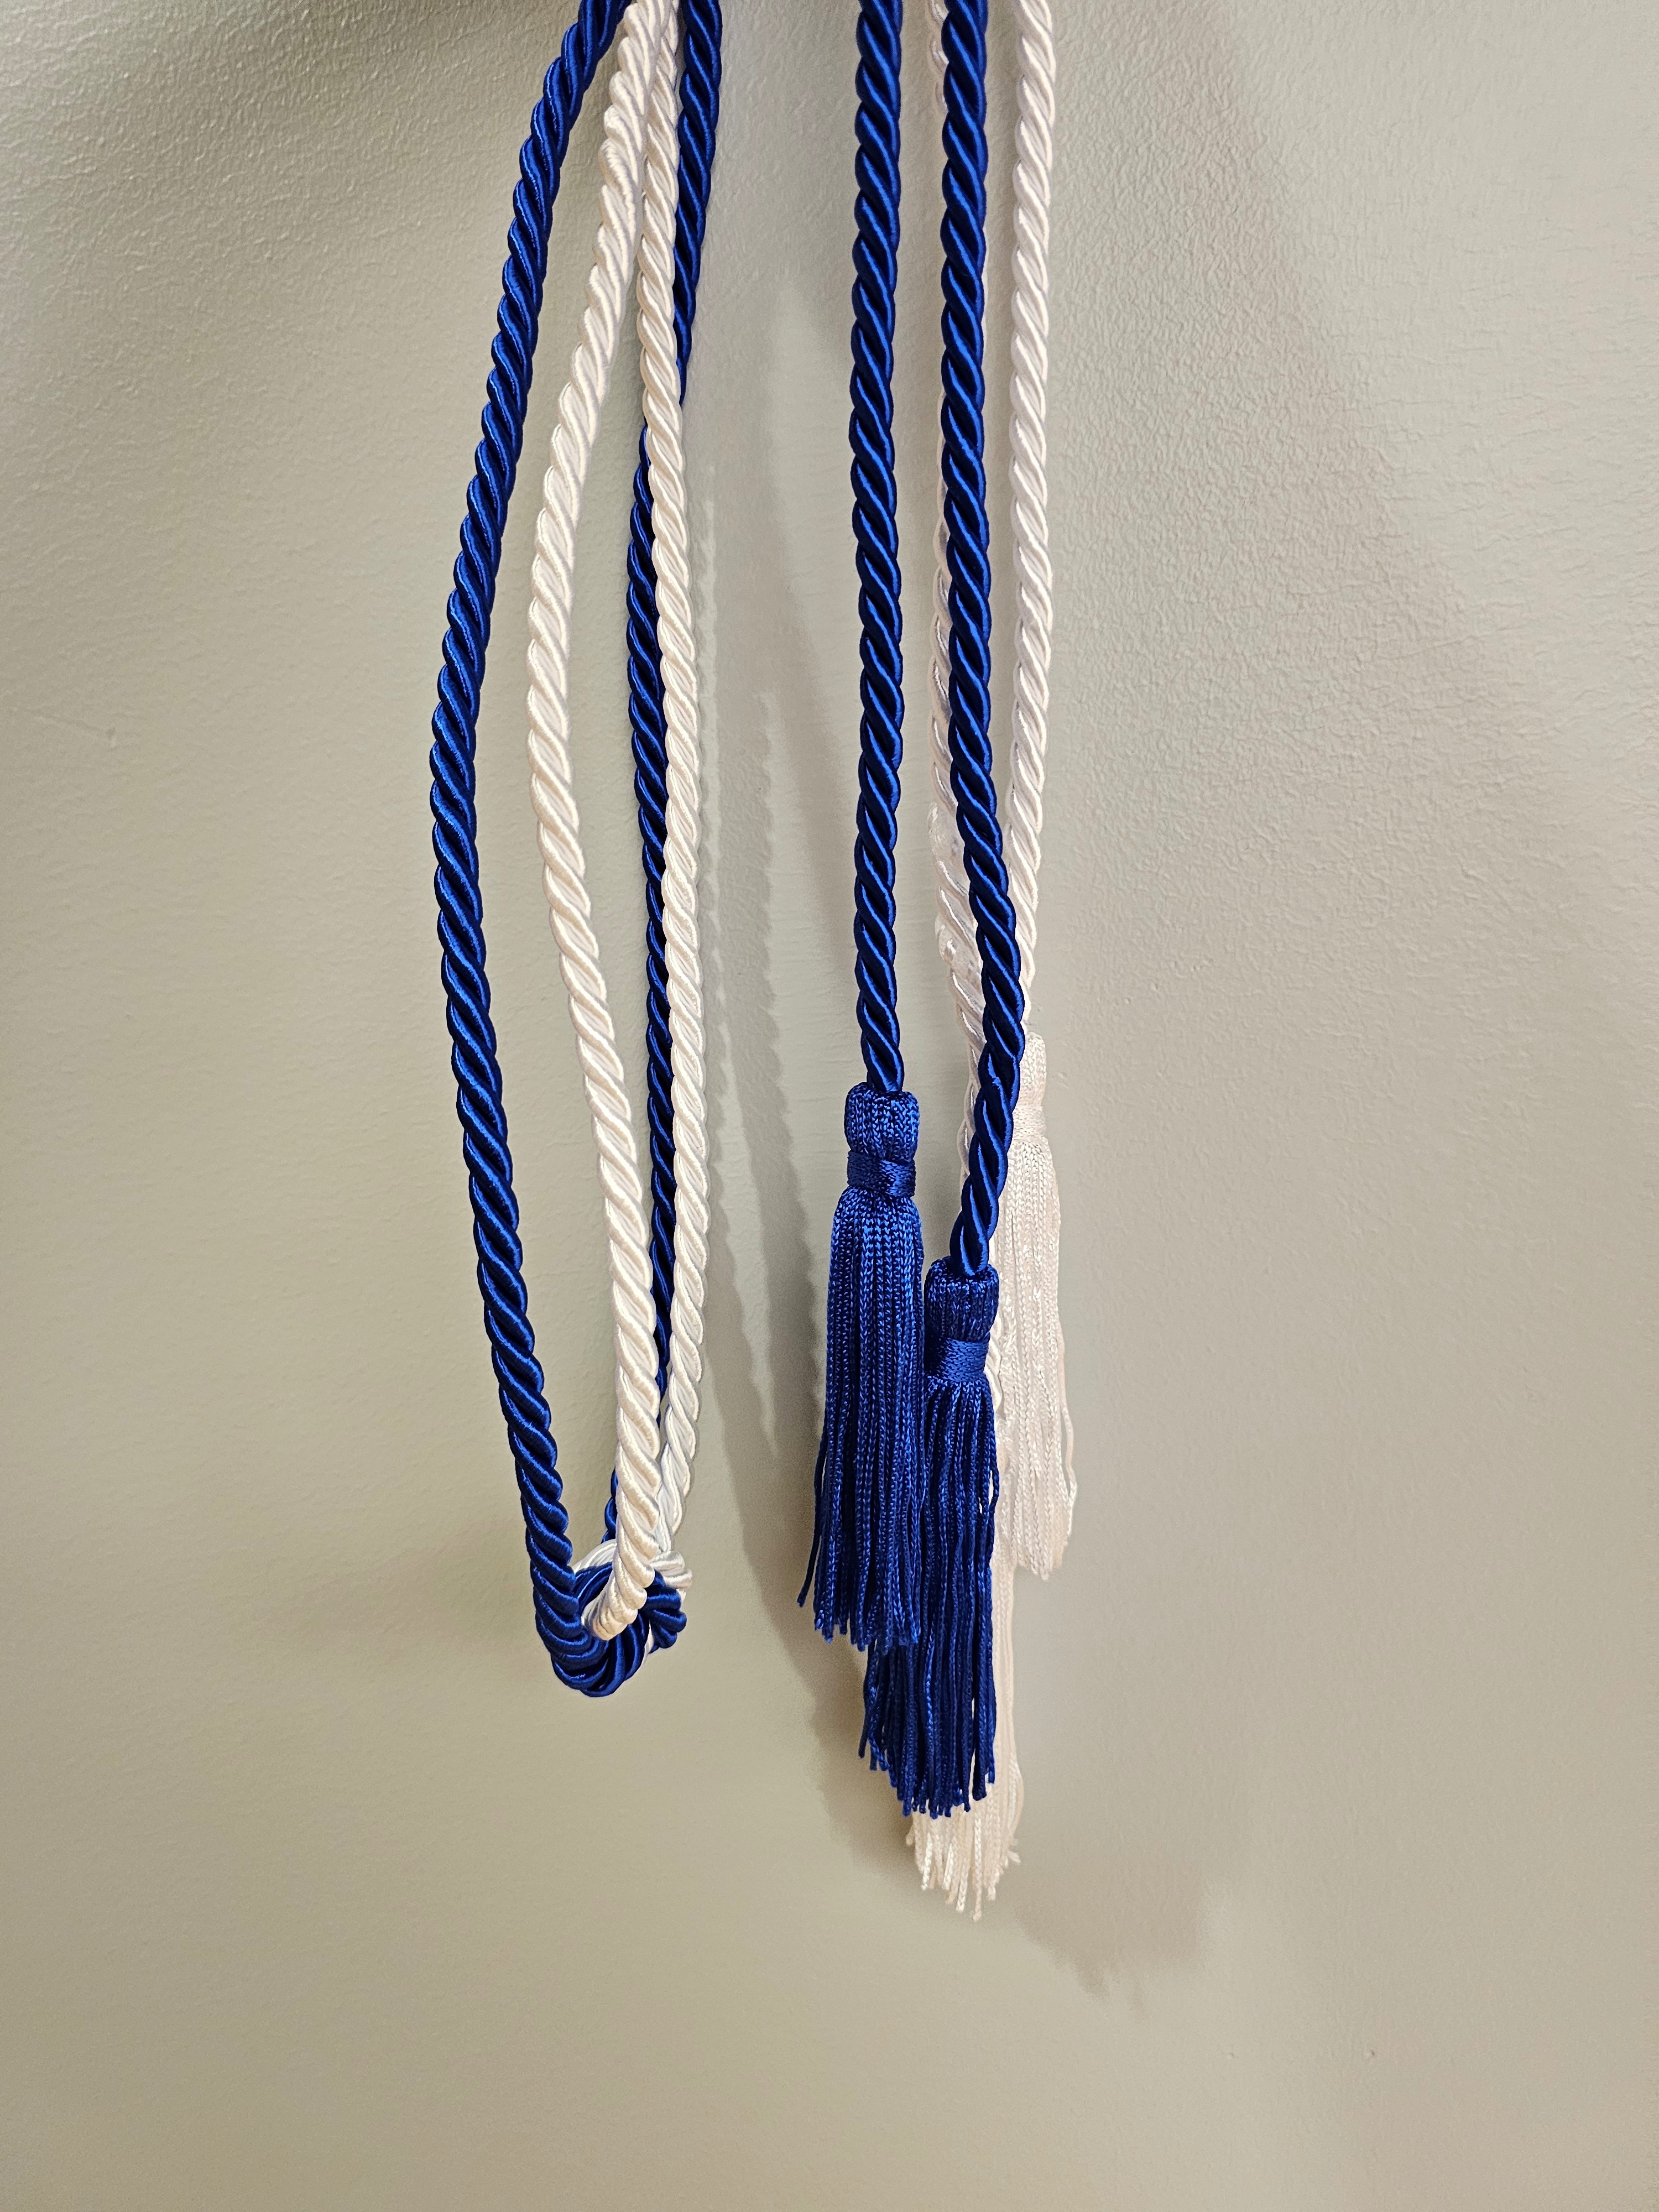 Honors Cord